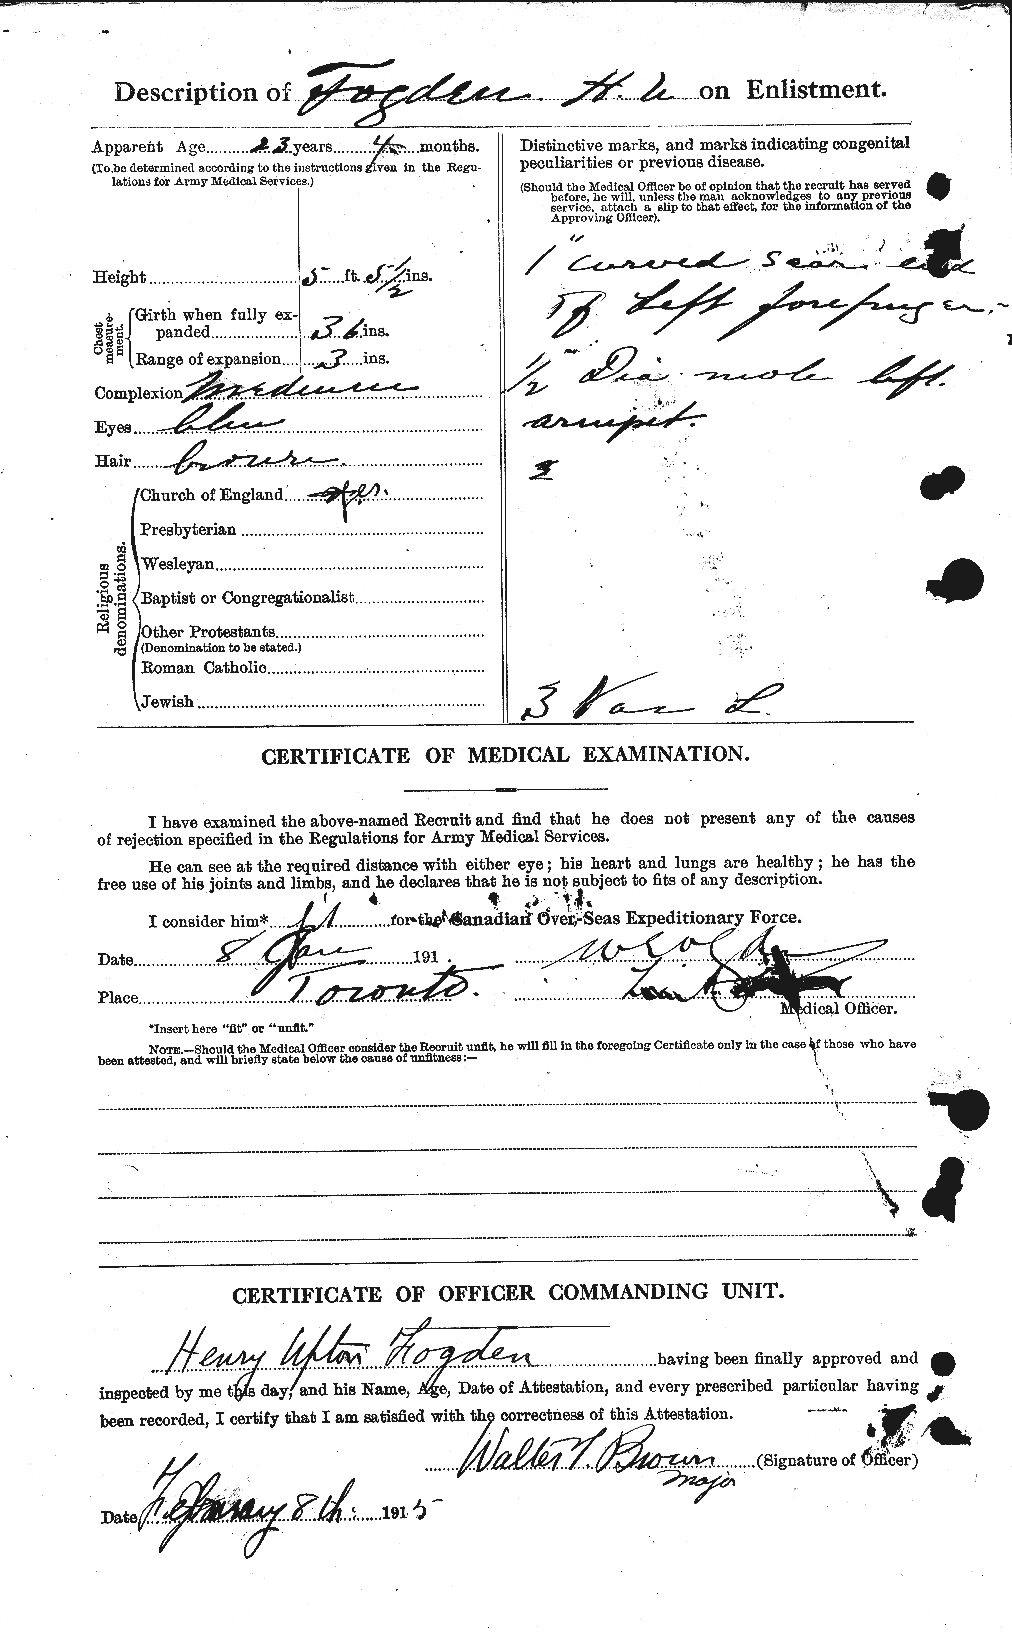 Personnel Records of the First World War - CEF 328026b